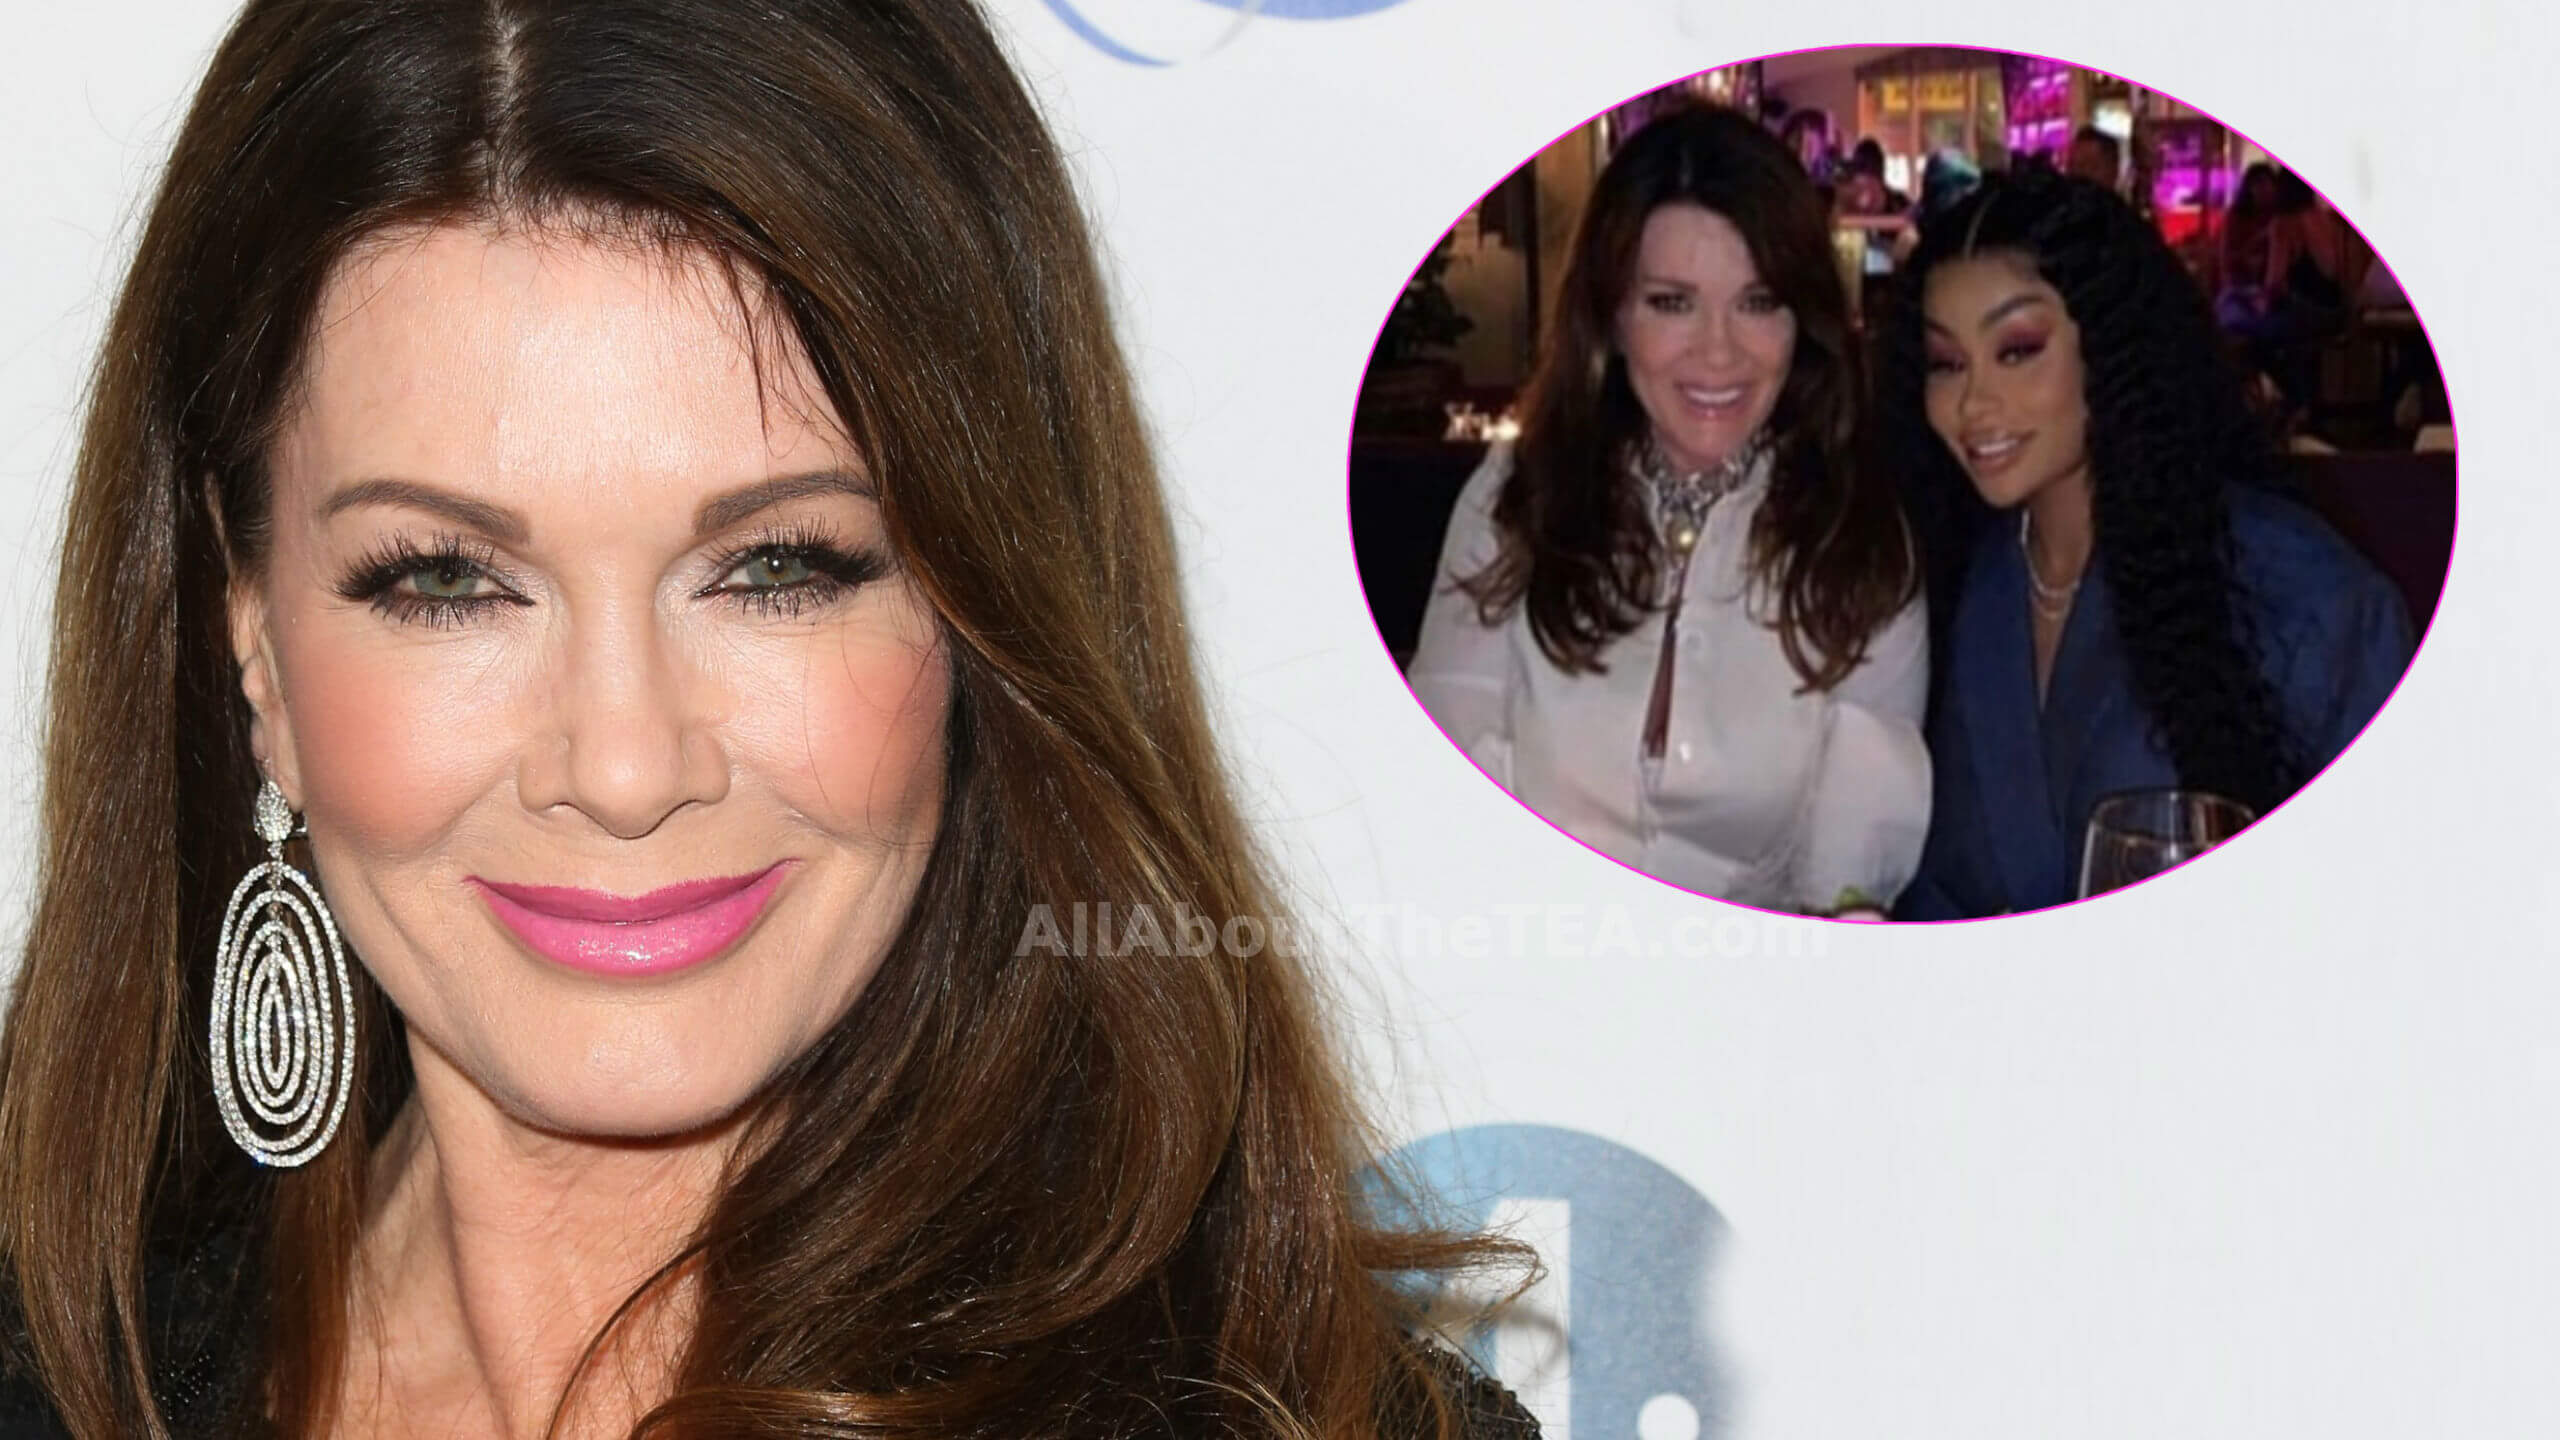 Lisa Vanderpump Dines With Kyle Richards BFF’s Enemy Blac Chyna and Spark NEW Reality Show Rumors!